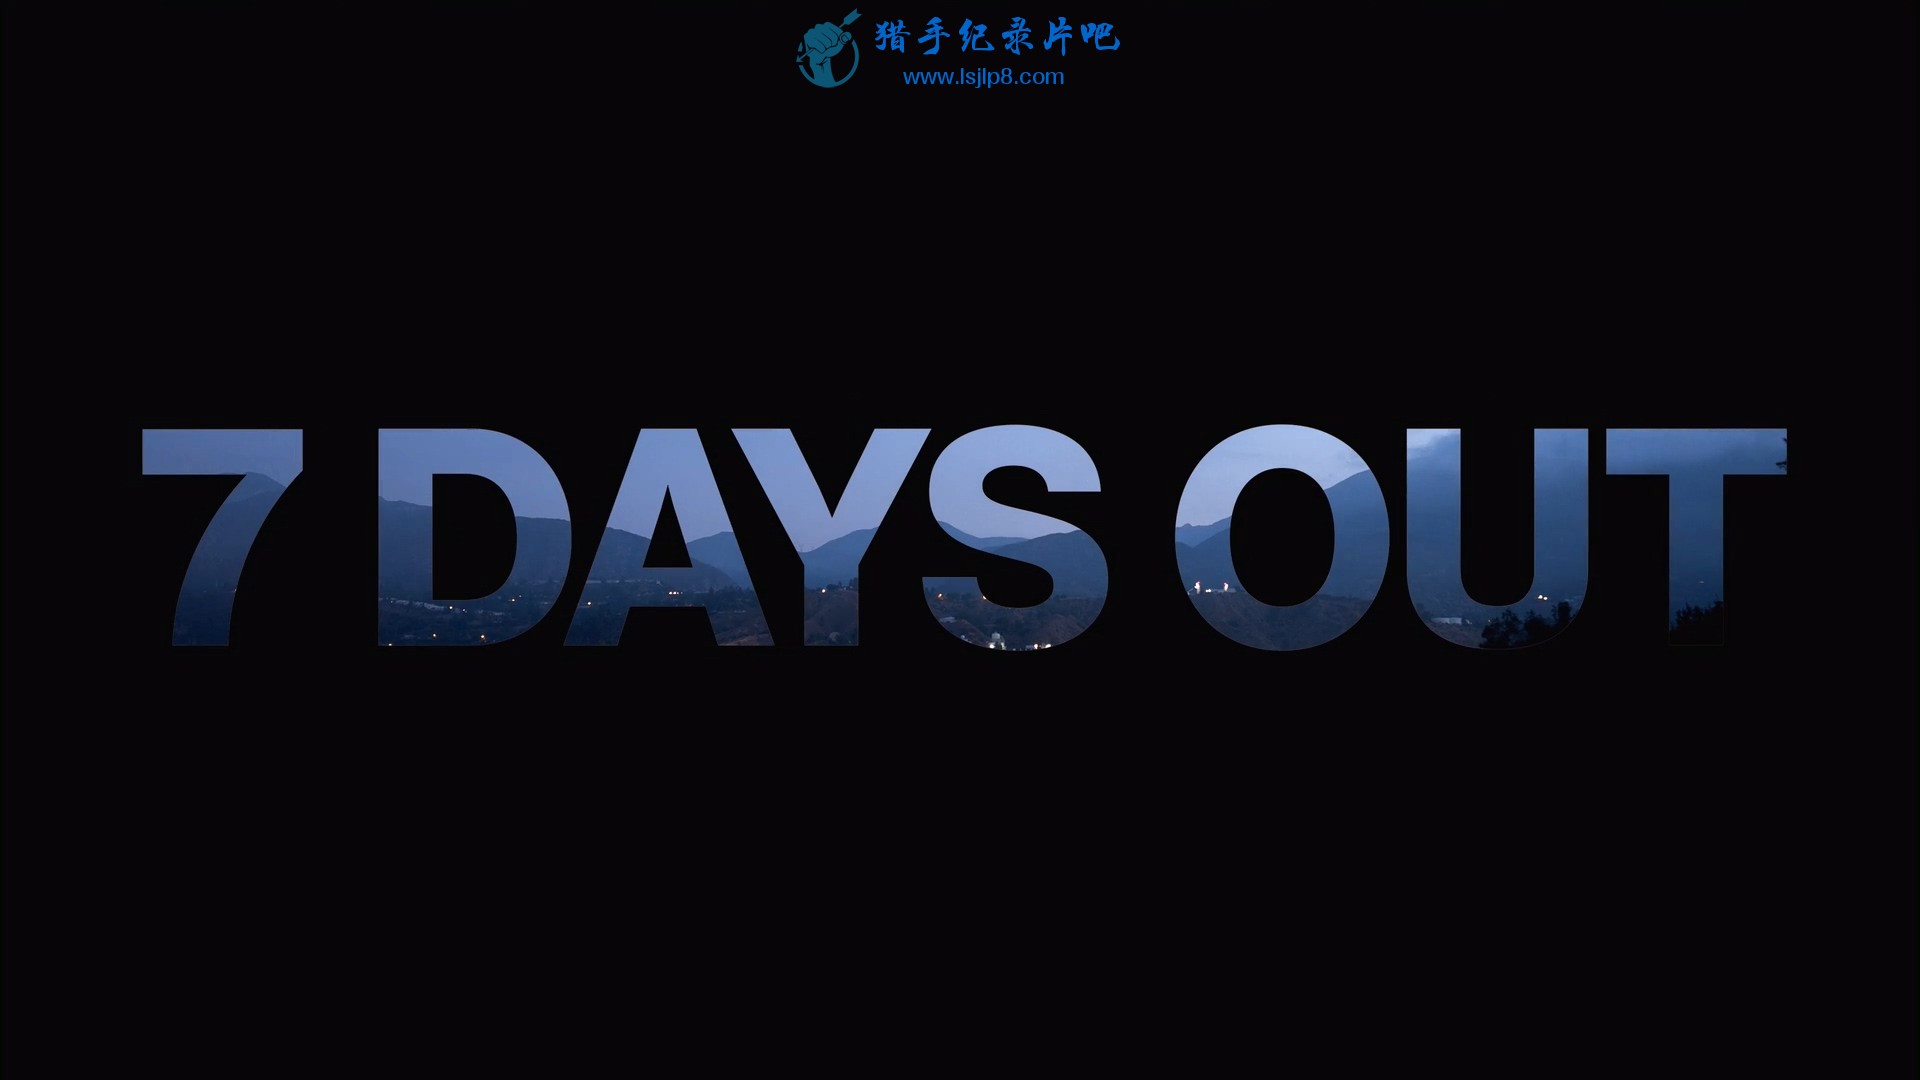 7.Days.Out.S01E01.1080p.WEB.X264-INFLATE.mkv_20191017_133132.537.jpg